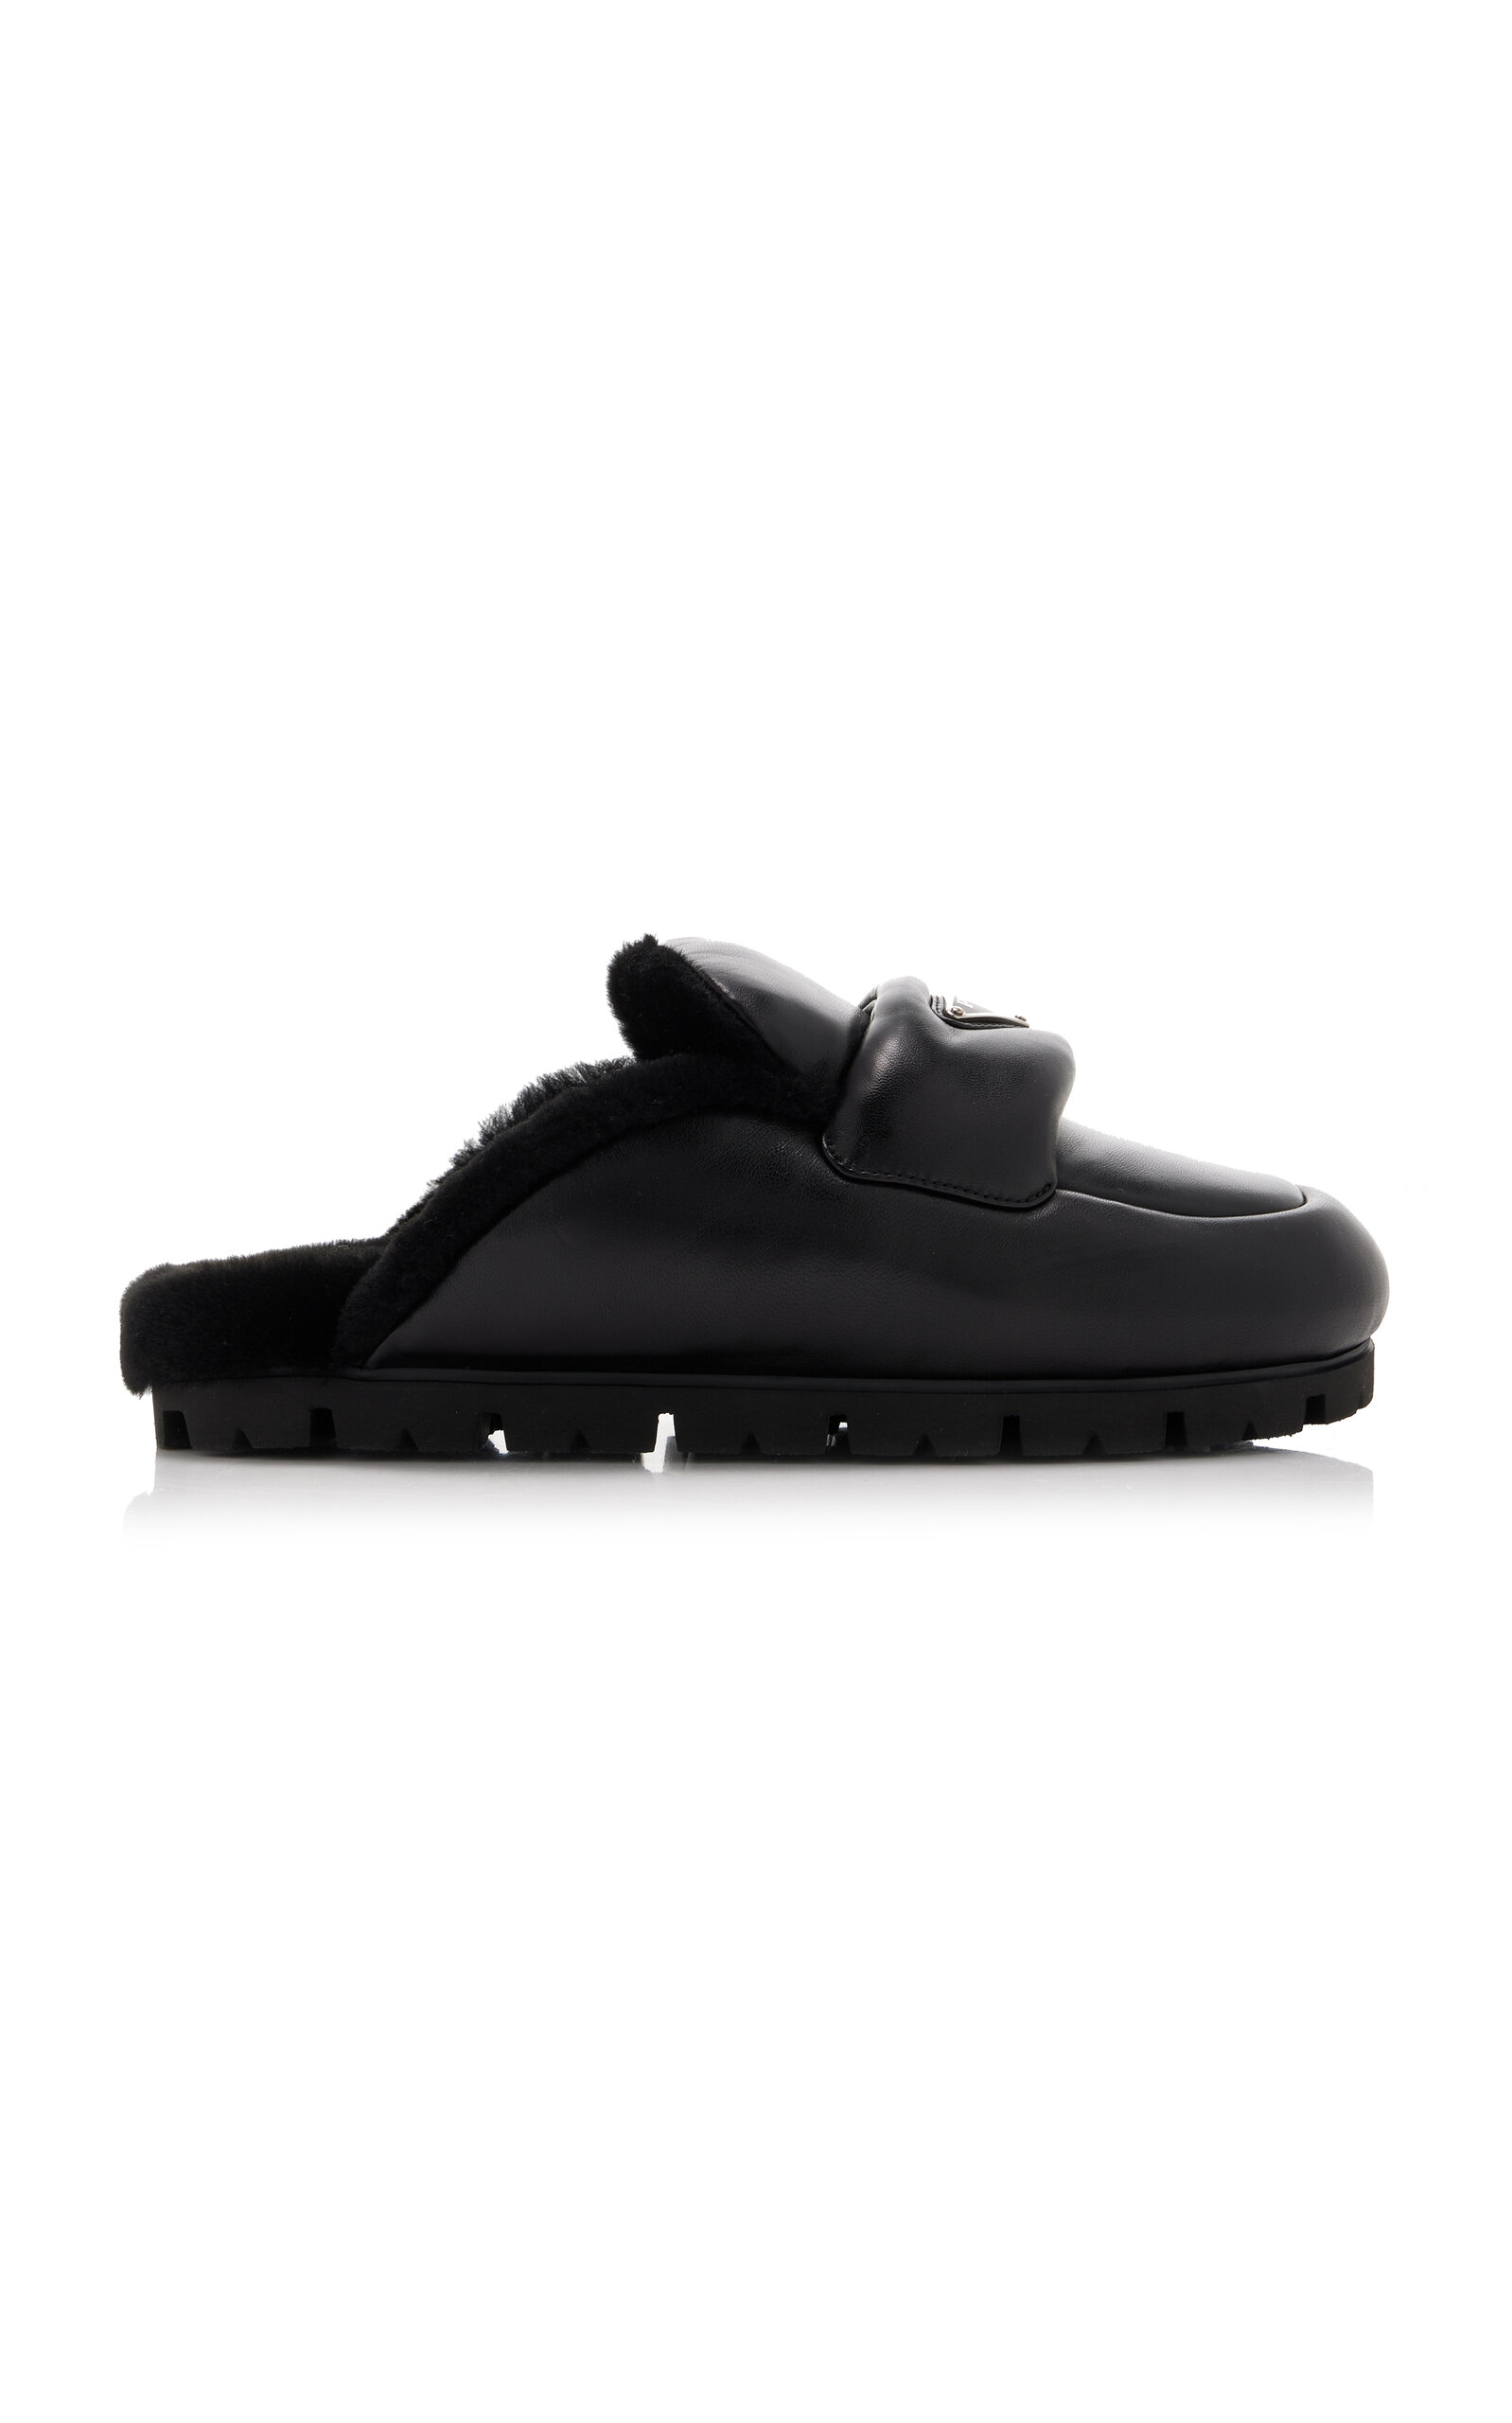 Prada Padded Leather Loafer Mules In Black